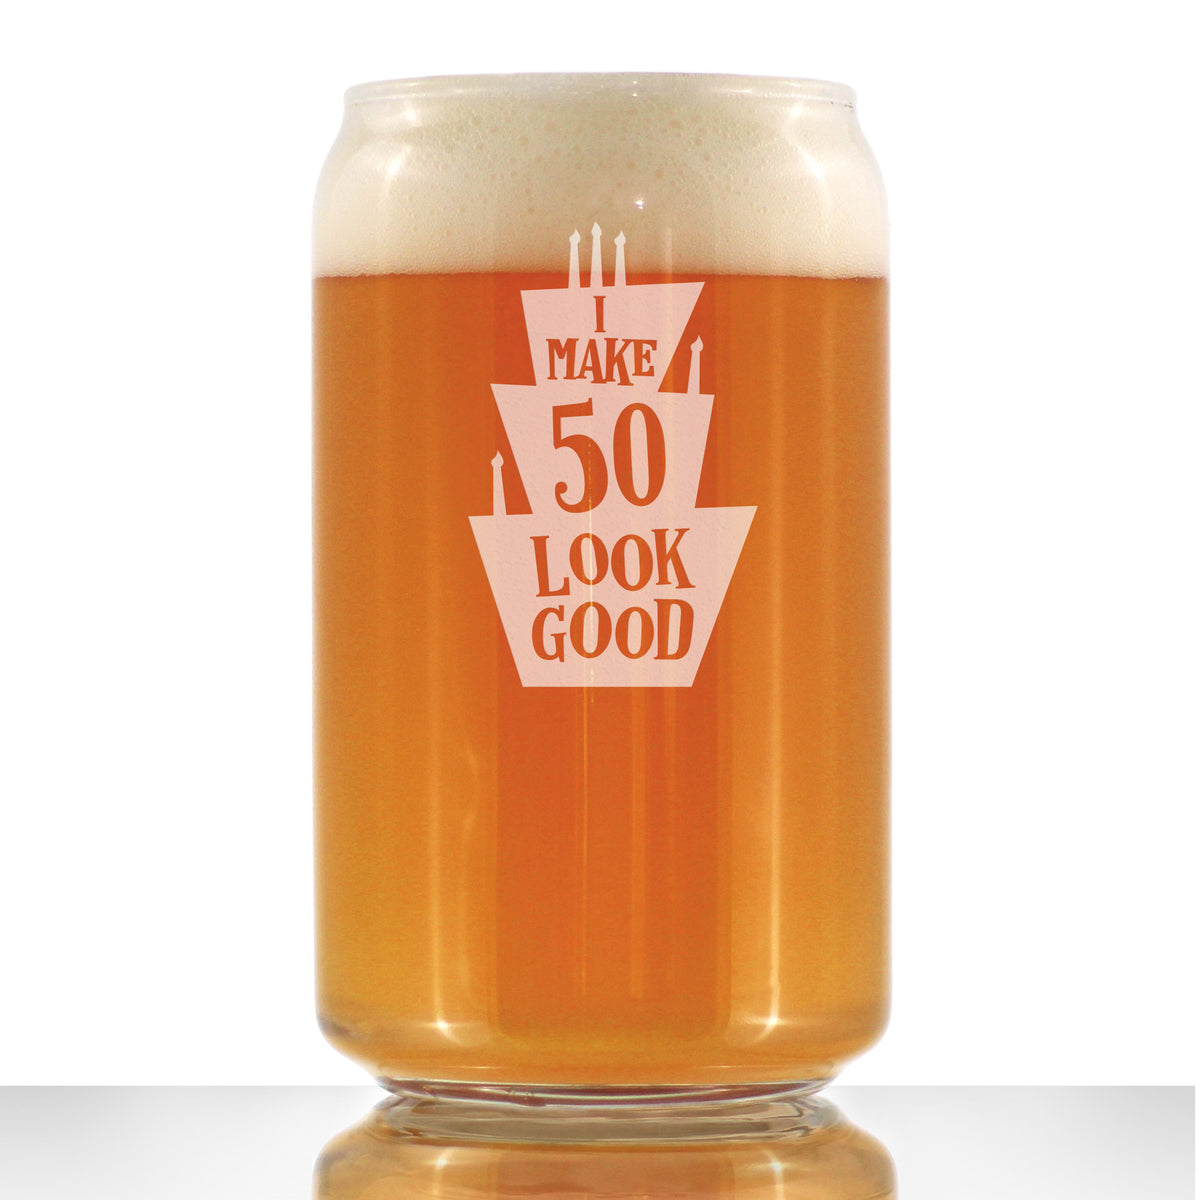 Make 50 Look Good - Funny 16 oz Beer Can Pint Glass - 50th Birthday Gifts for Men or Women Turning 50 - Bday Party Decor